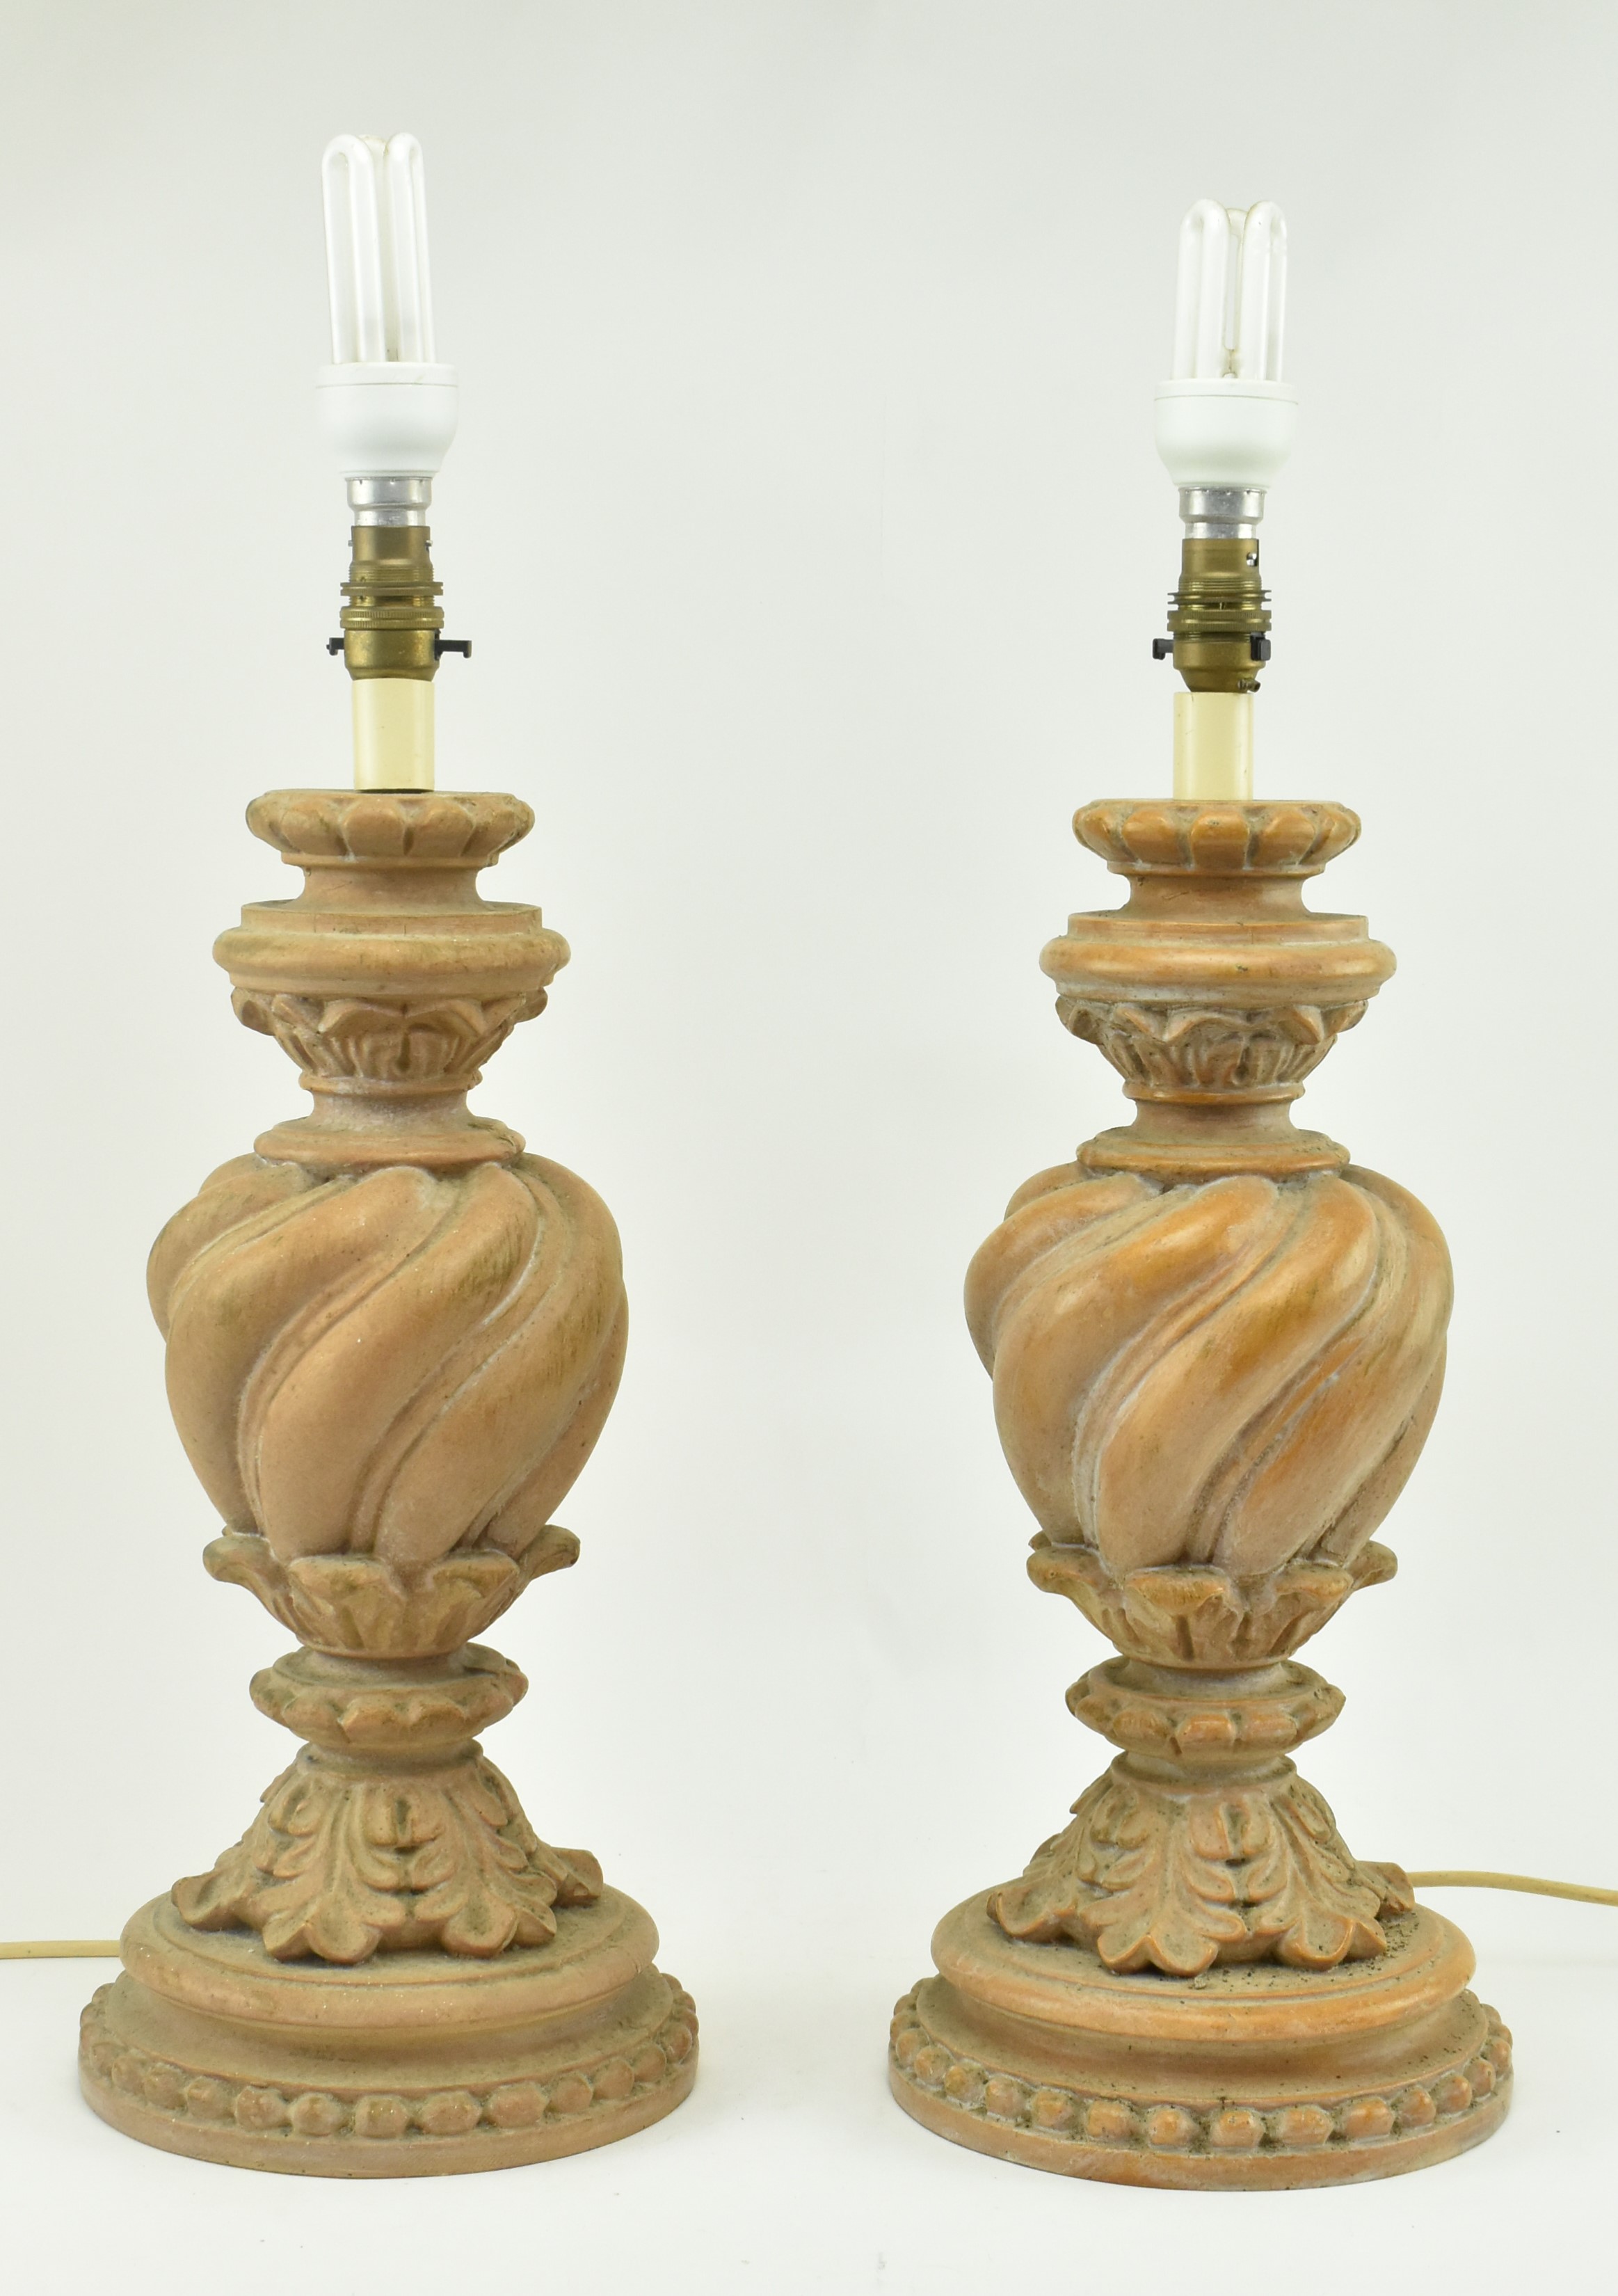 PAIR OF CLASSICAL STYLE RESIN WOODEN EFFECT DESK LAMPS